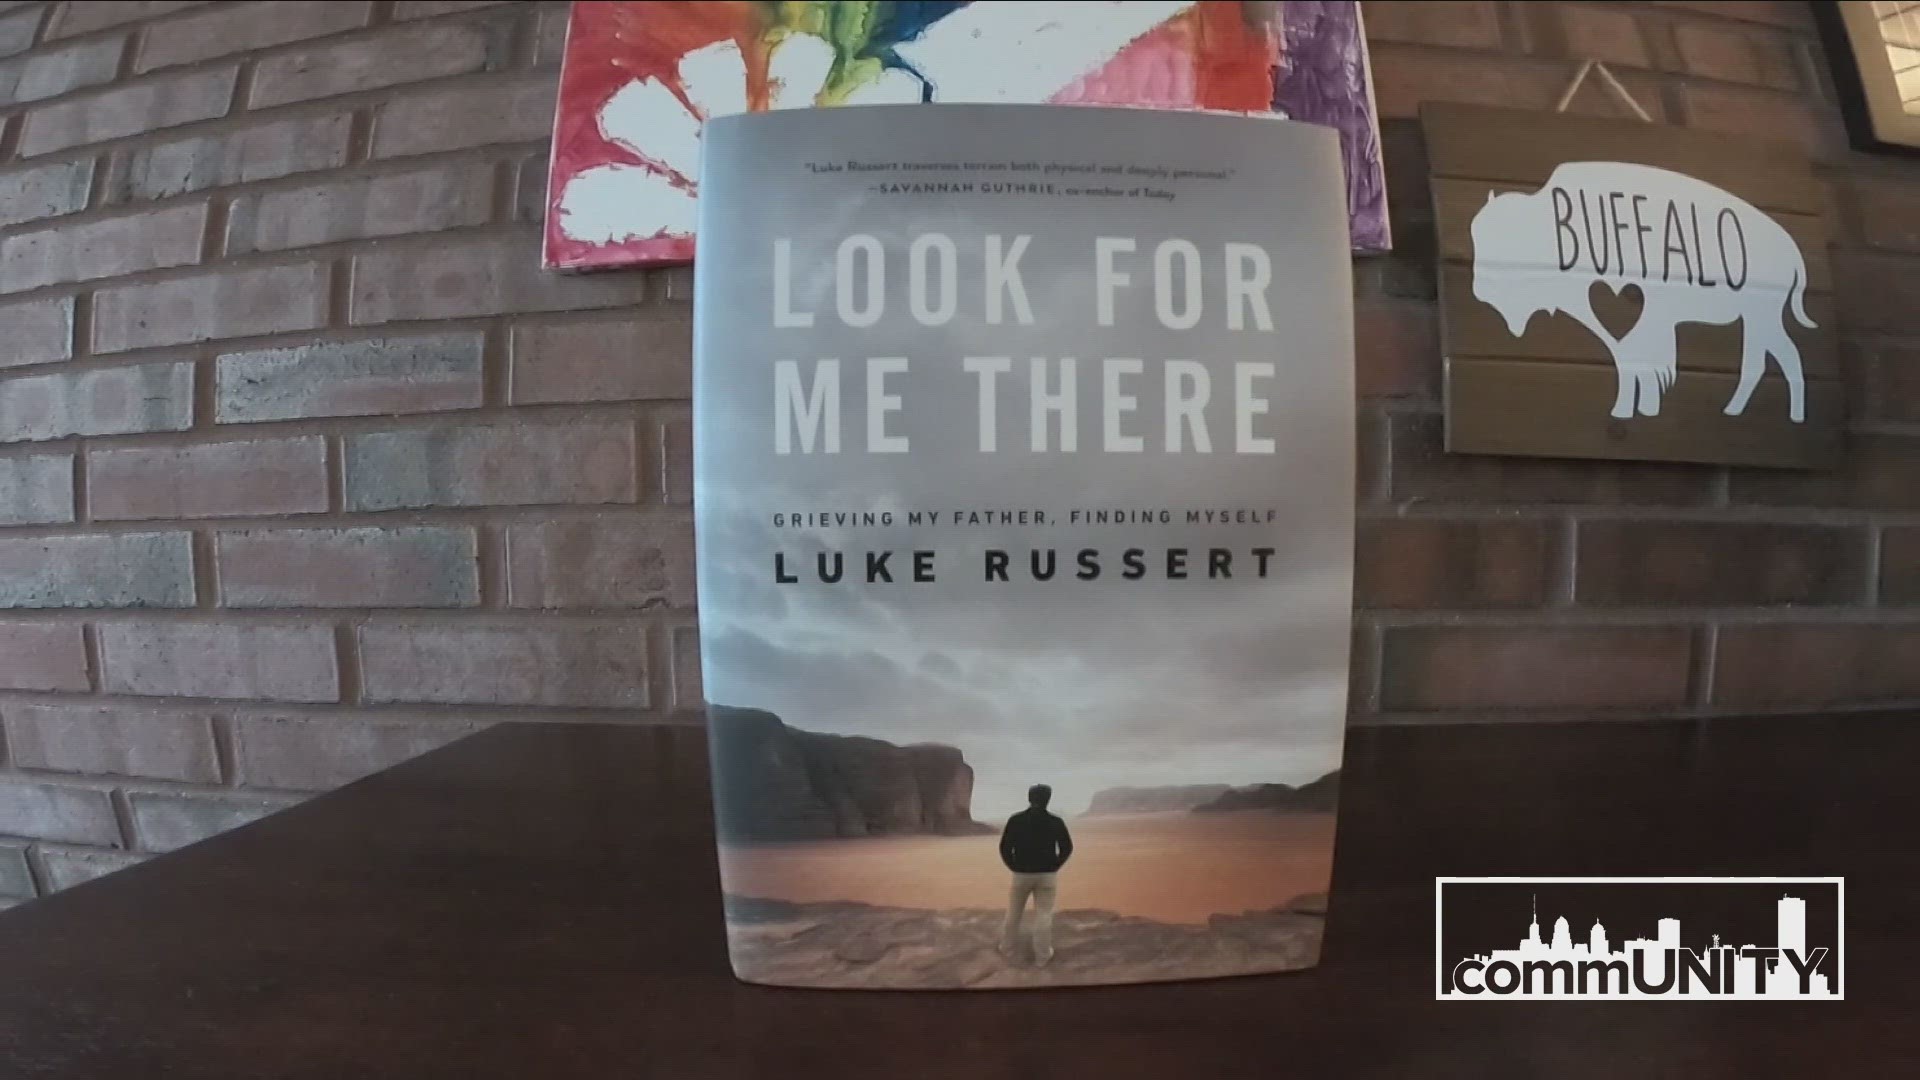 His dad was Tim Russert. Now his son has penned a book, which he said was difficult to write, but rewarding.